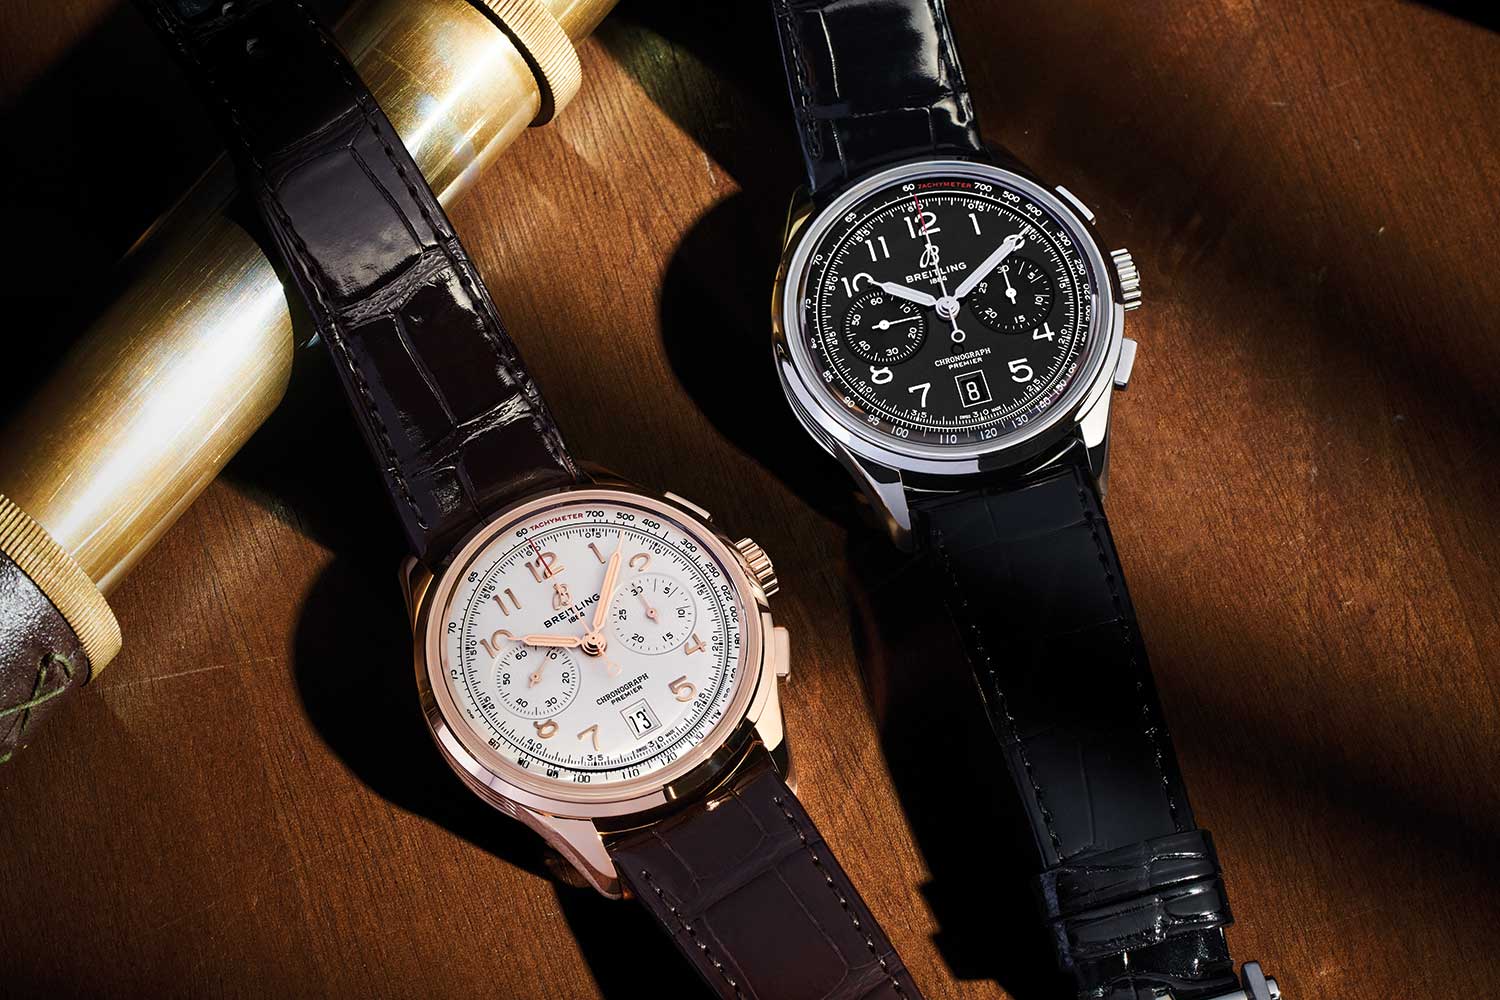 In 2021 Breitling released a Premier B09 Chronograph 40 in stainless steel with a pistachio green dial, a Premier B15 Duograph 42 in 18k red gold with a black dial and a Premier B25 Datora 42 in stainless steel with a copper dial, contemporary takes on their 1940s ancestors